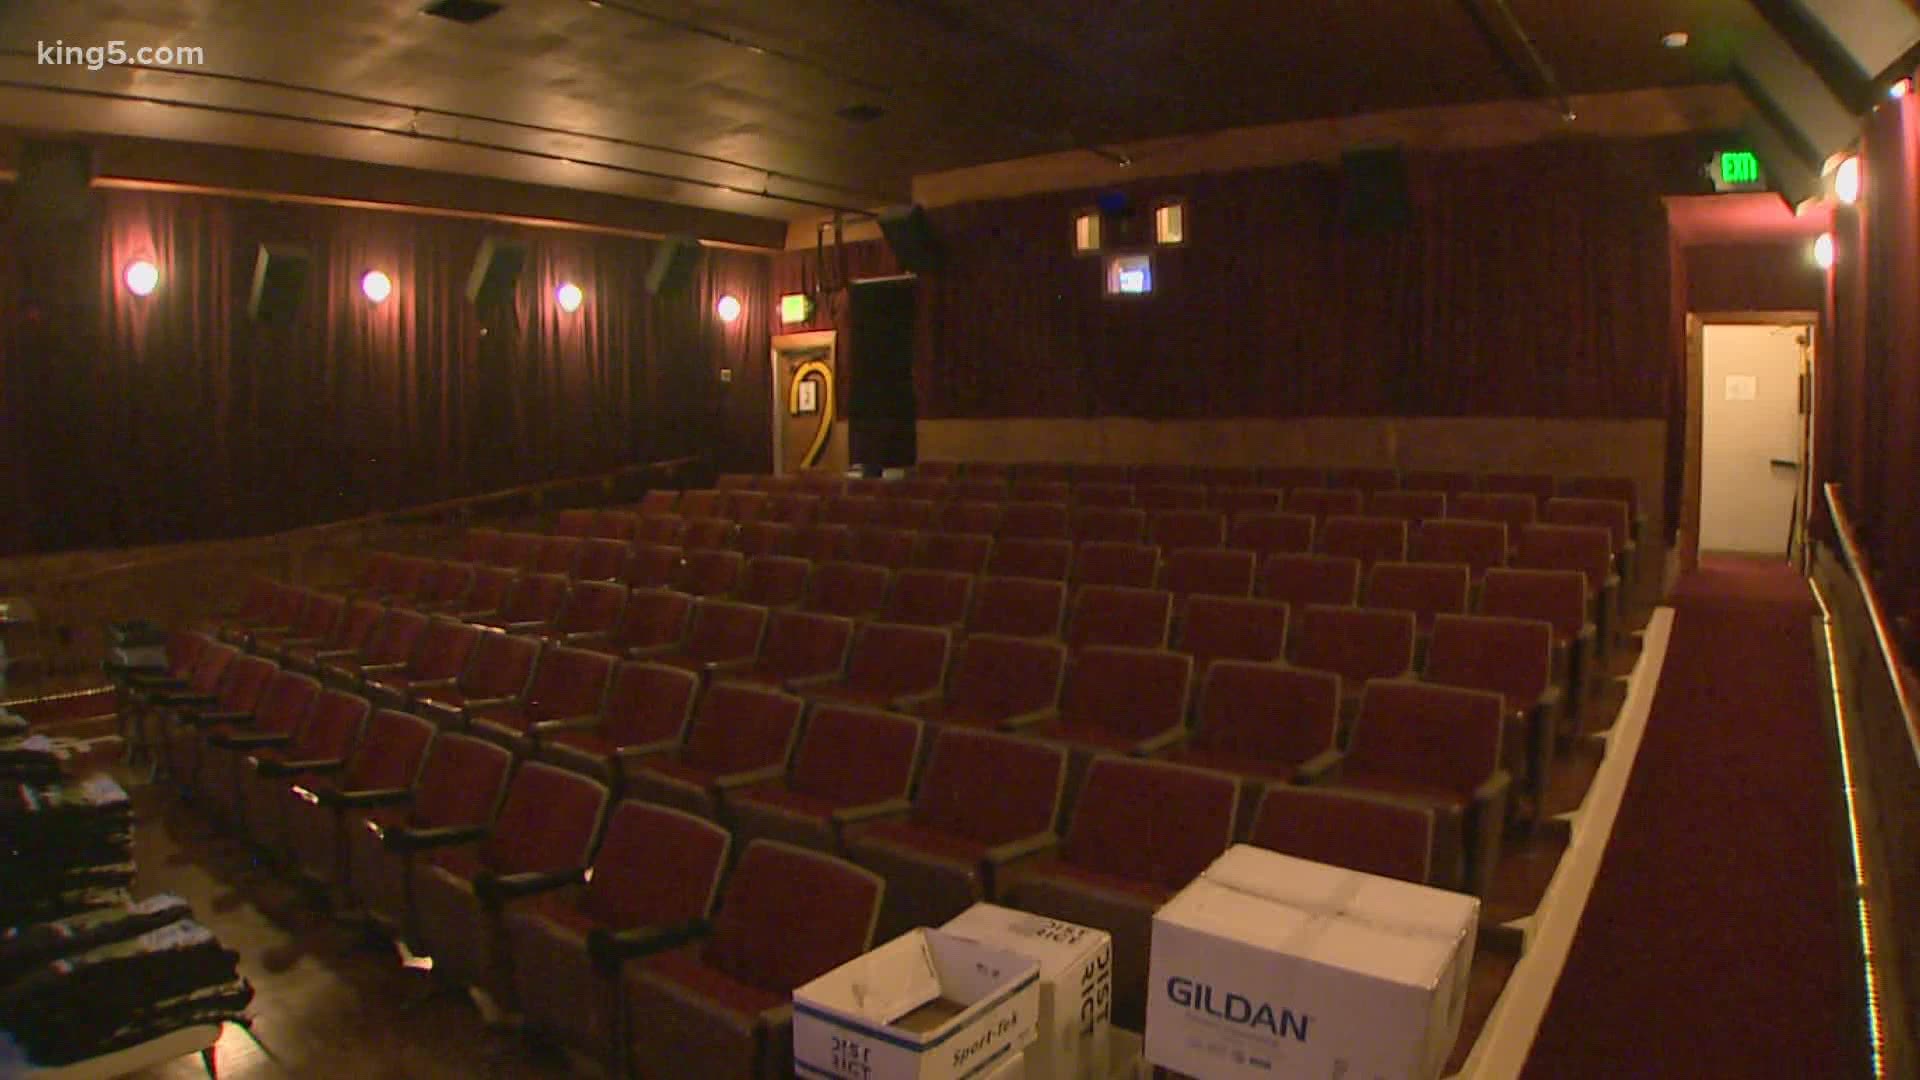 AMC is reopening its 14 locations in the state, while some smaller, independently-owned theaters are choosing to stay closed, saying they can't afford to open yet.